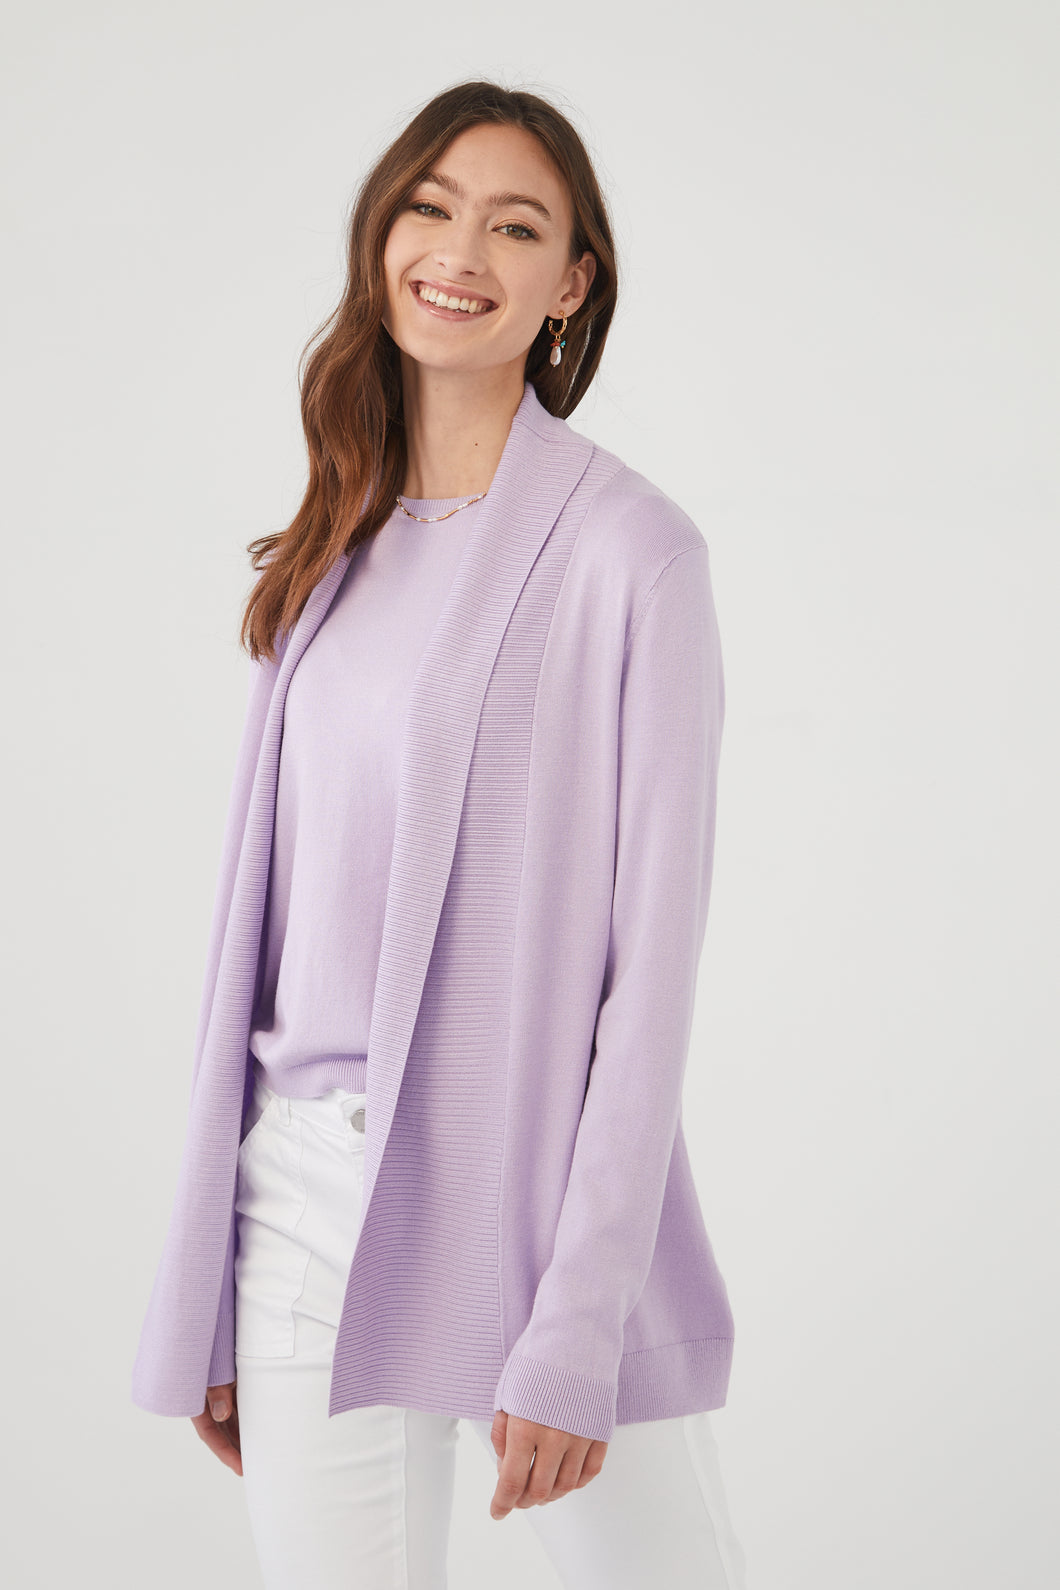 A must have style to include in your wardrobe, this fabulous wild pansy colored cardigan is a year-round staple.  Pair with our matching short sleeve top in the same color- Shana Short Sleeve Lightweight Sweater for a perfect look.  Color- Wild Pansy; lilac. Long sleeve. Open front.